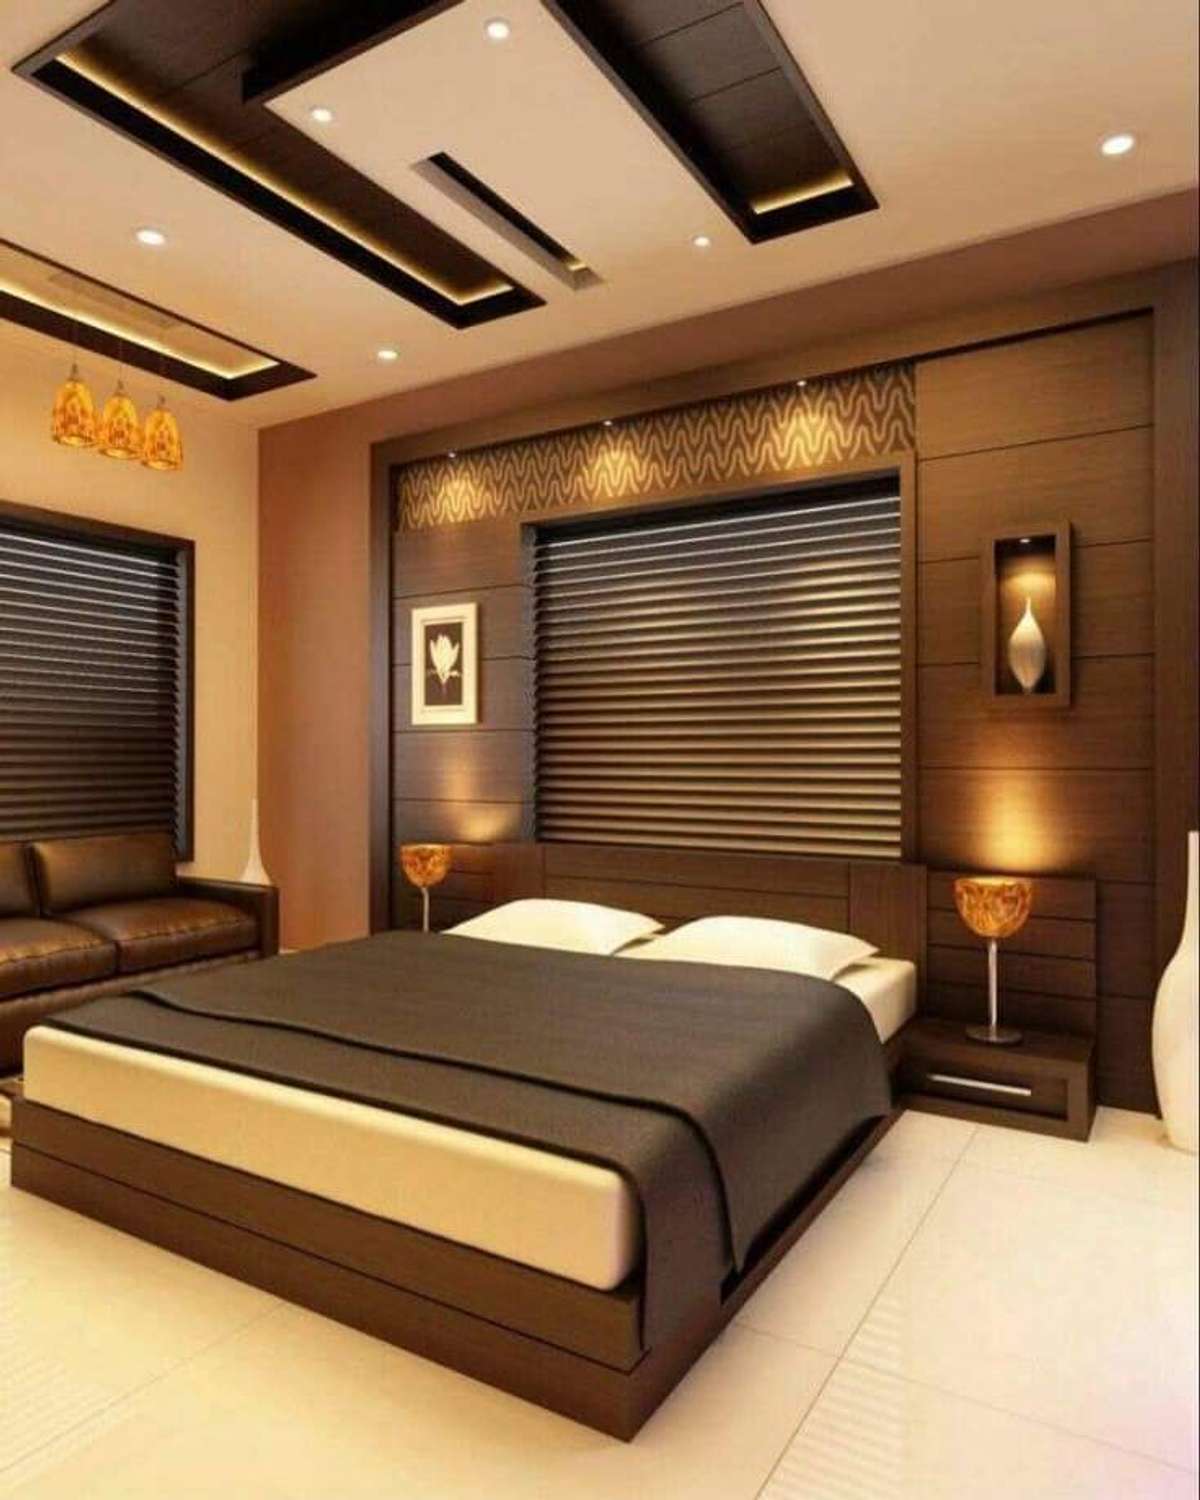 Find here the best home interiors and get design your Entire Home Including your ✓Livingroom ✓Bedroom ✓Kitchen ✓Bathroom and everything.
.
.
.
contact us  9953725277
Email I'd: info@cultureinterior.in
Website: www.cultureinterior.in

Please do like ,share & subscribe our you tube channel https://youtube.com/channel/UC9Hm9090aOlJOcszdAb6-PQ

https://www.linkedin.com/in/rohit-rastogi-396361121

https://www.instagram.com/invites/contact/?i=6a8m1qm9qfdc&utm_content=j43si22

https://twitter.com/CultureInterio4?t=1RUlTjWZOaOTFeSL57kaxw&s=09
.
.
.
#interiors #interiordesign #interior #design #homedecor #decor #architecture #home #interiordesigner #homedesign #interiorstyling #furniture #interiordecor #decoration #art #luxury #designer #inspiration #interiordecorating #style #homesweethome #livingroom #interiorinspo #furnituredesign #handmade #homestyle #interiorstyle #interiorinspirations